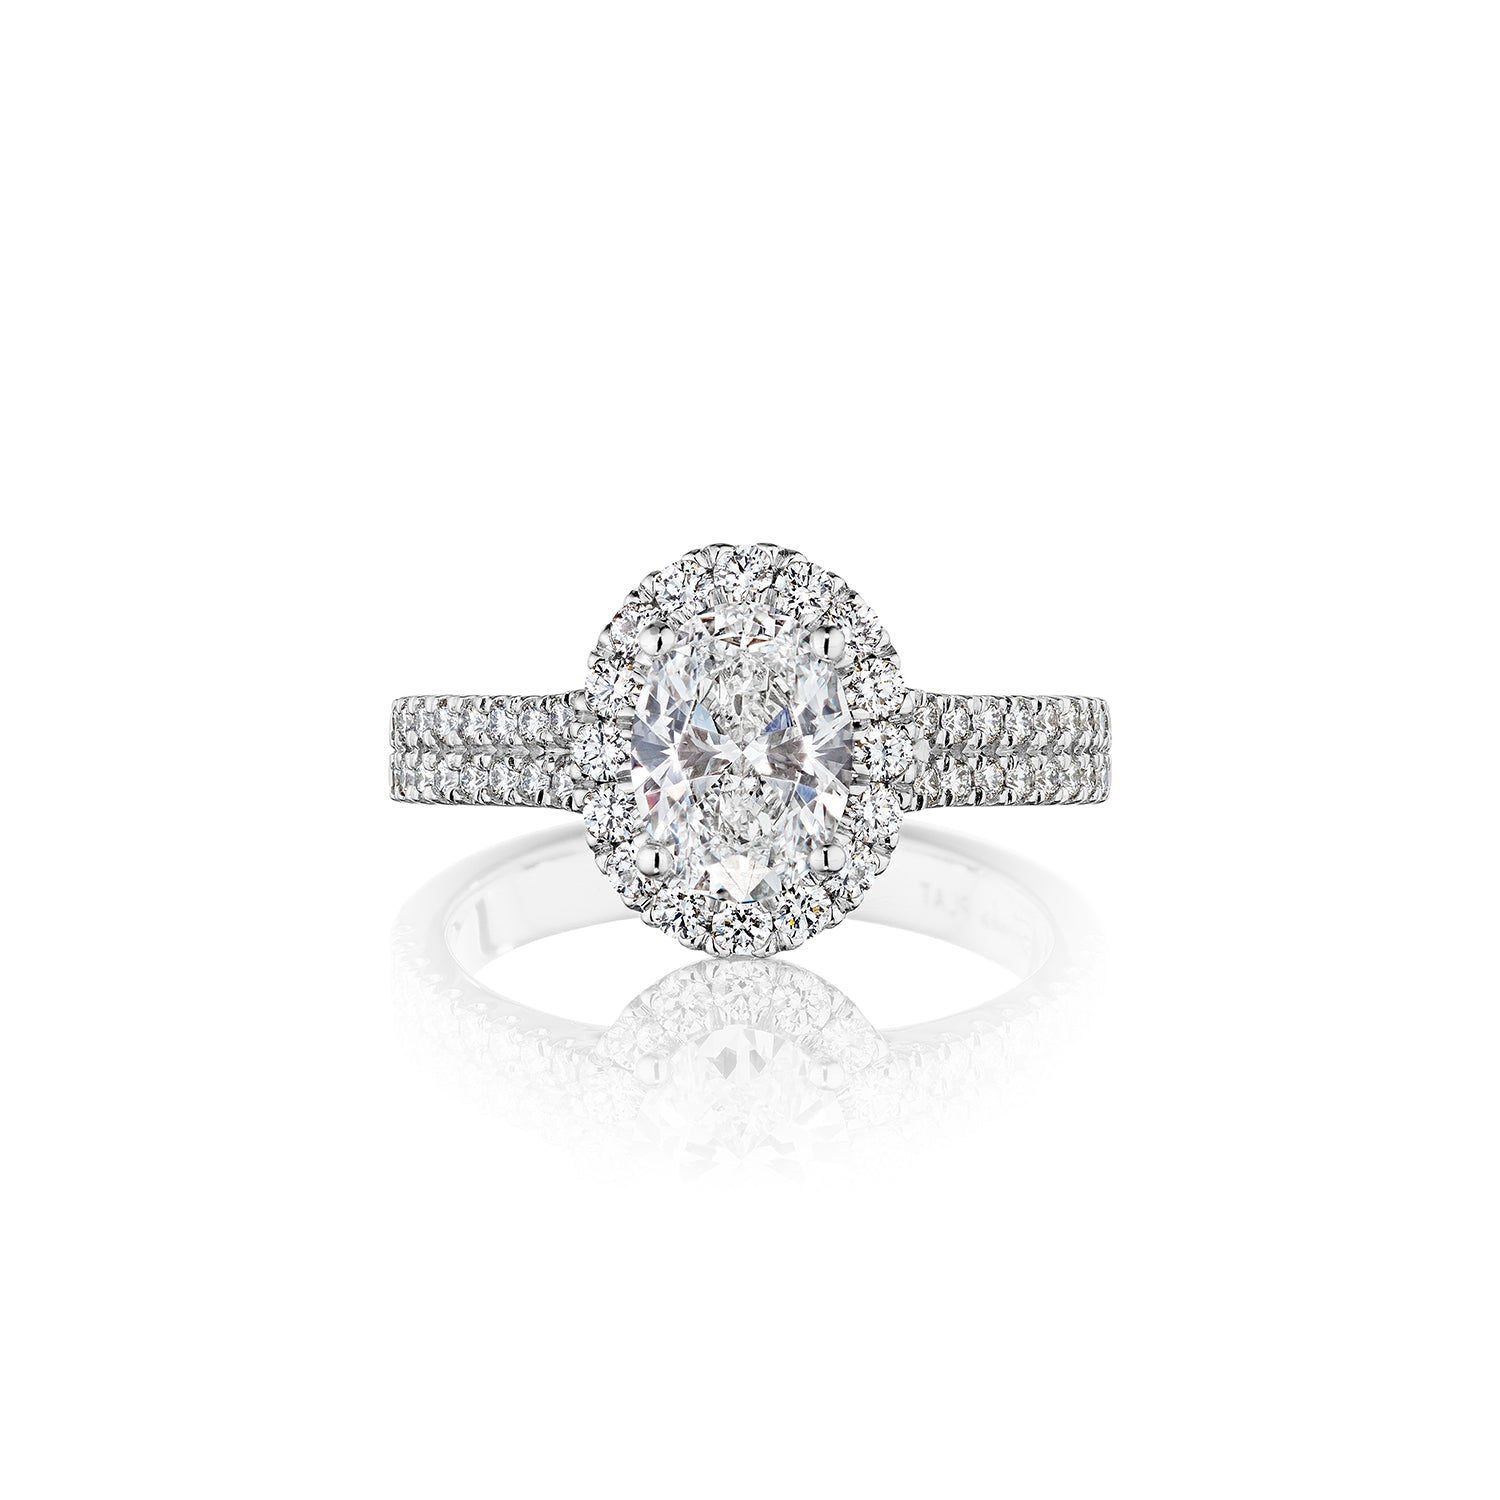 Fink's Exclusive Platinum Oval Center Stone Diamond Halo Engagement Ring